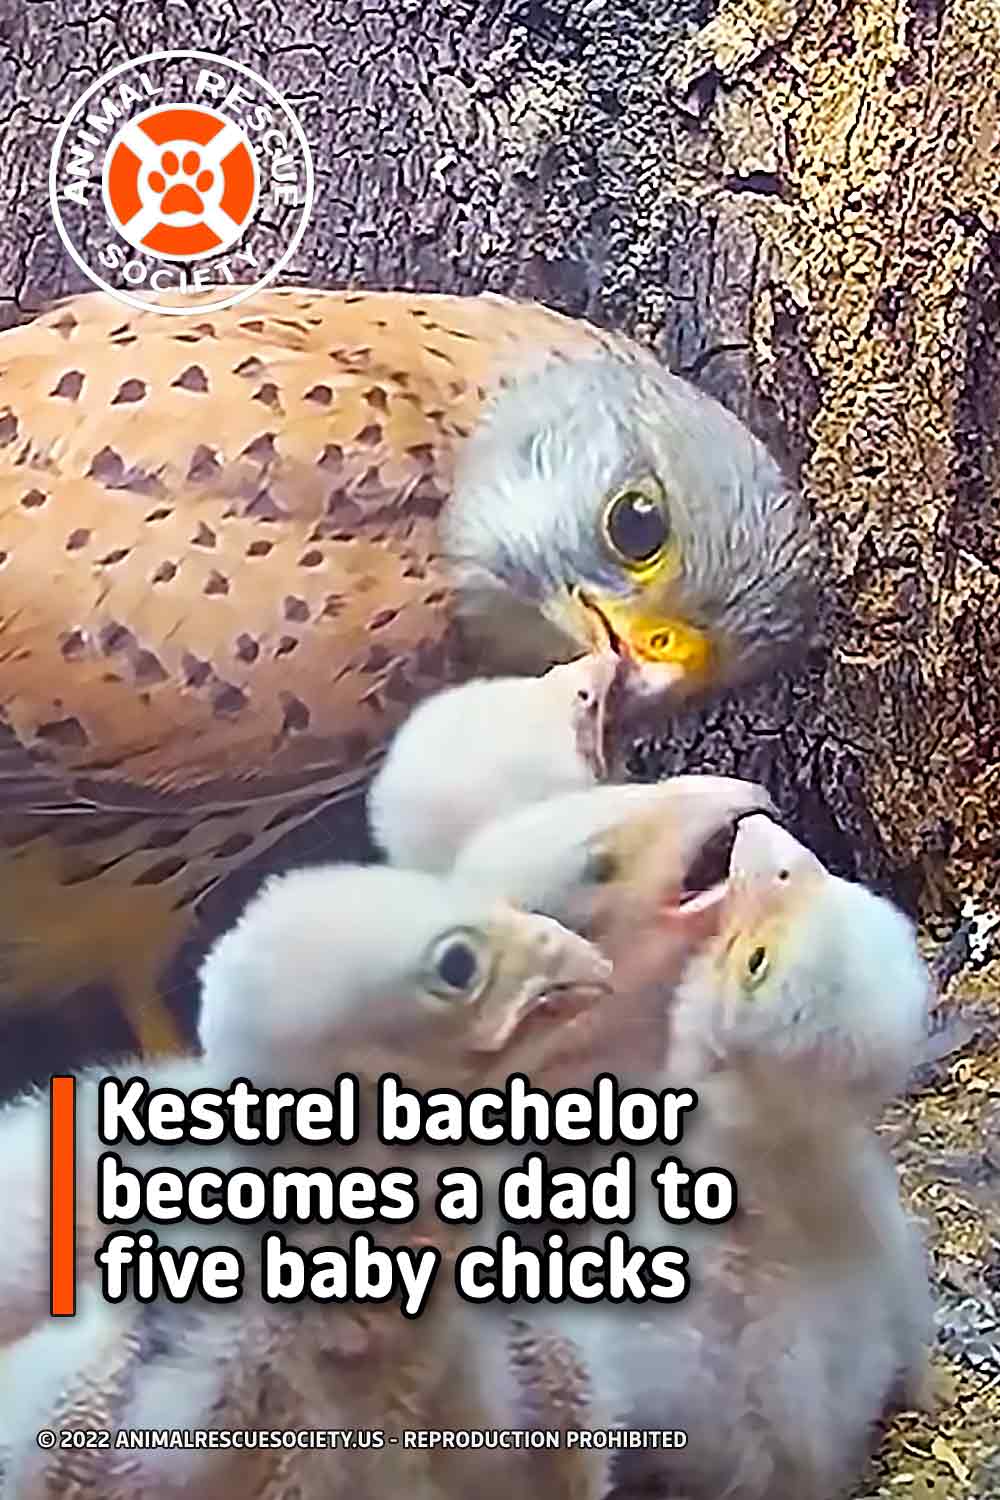 Kestrel bachelor becomes a dad to five baby chicks